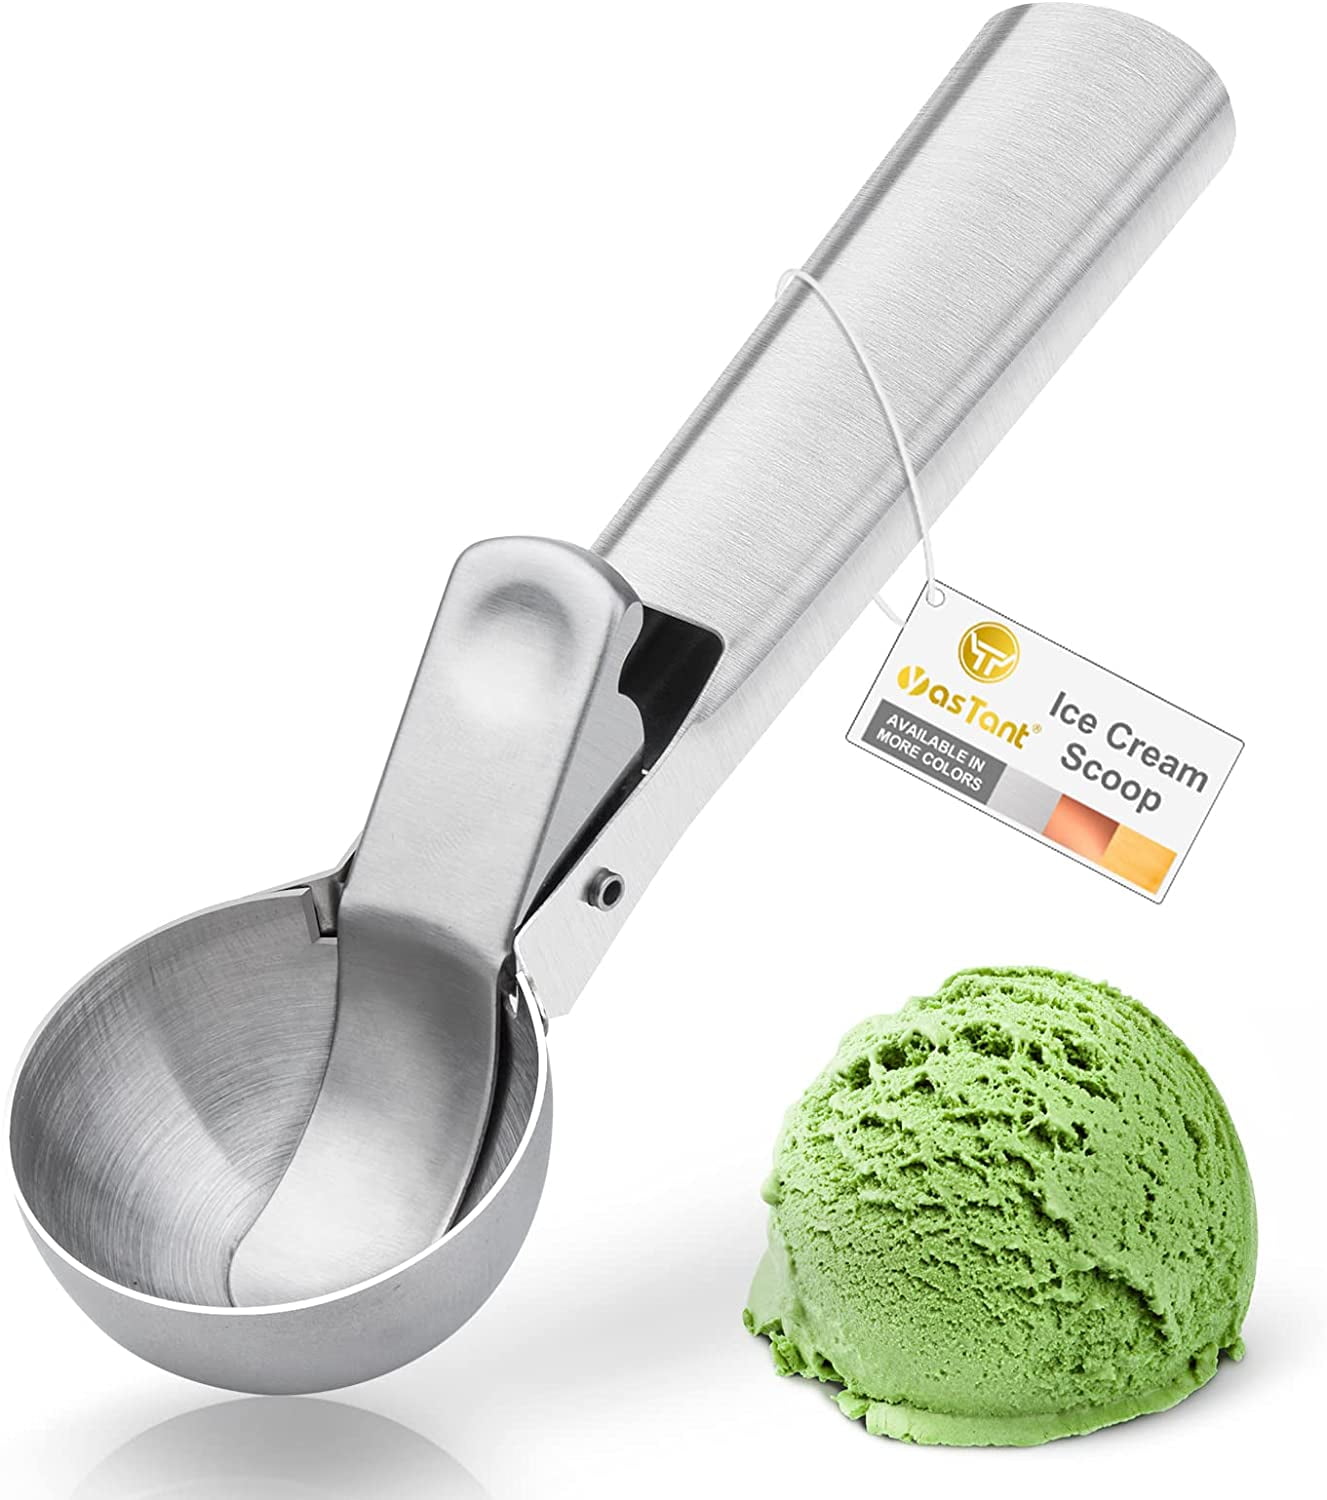 Stainless Steel Ice Cream Scoops